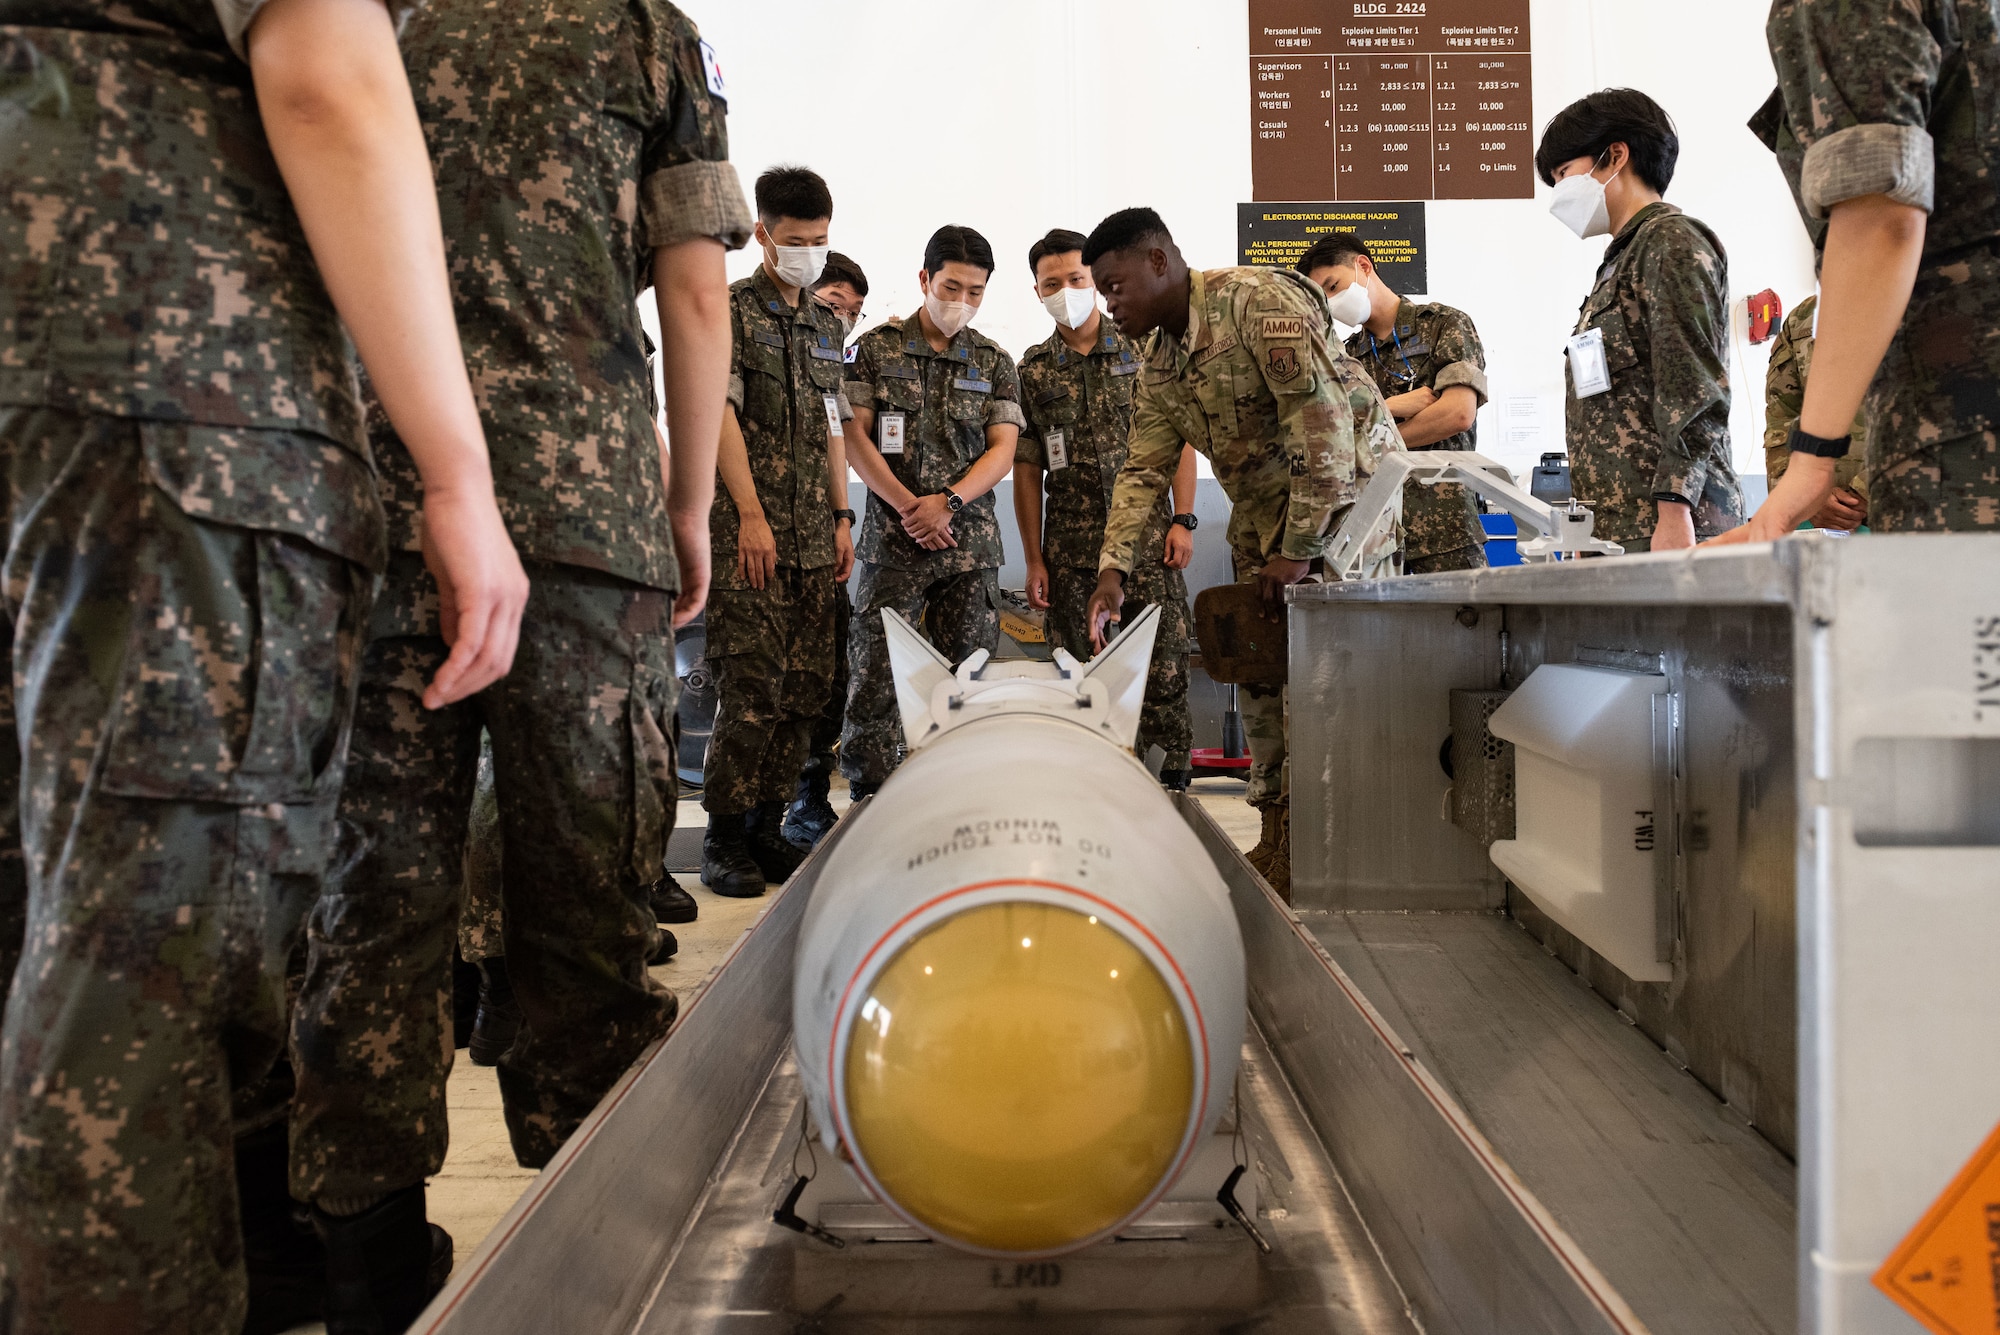 U.S. Air Force Airman 1st Class Yvener Desir, 51st Munitions Squadron precision-guided munition production crew member, explains the various components of an AGM-65 air-to-ground missile during an immersion tour for Republic of Korea Air Force translator officers at Osan Air Base, Republic of Korea, Aug. 2, 2022.